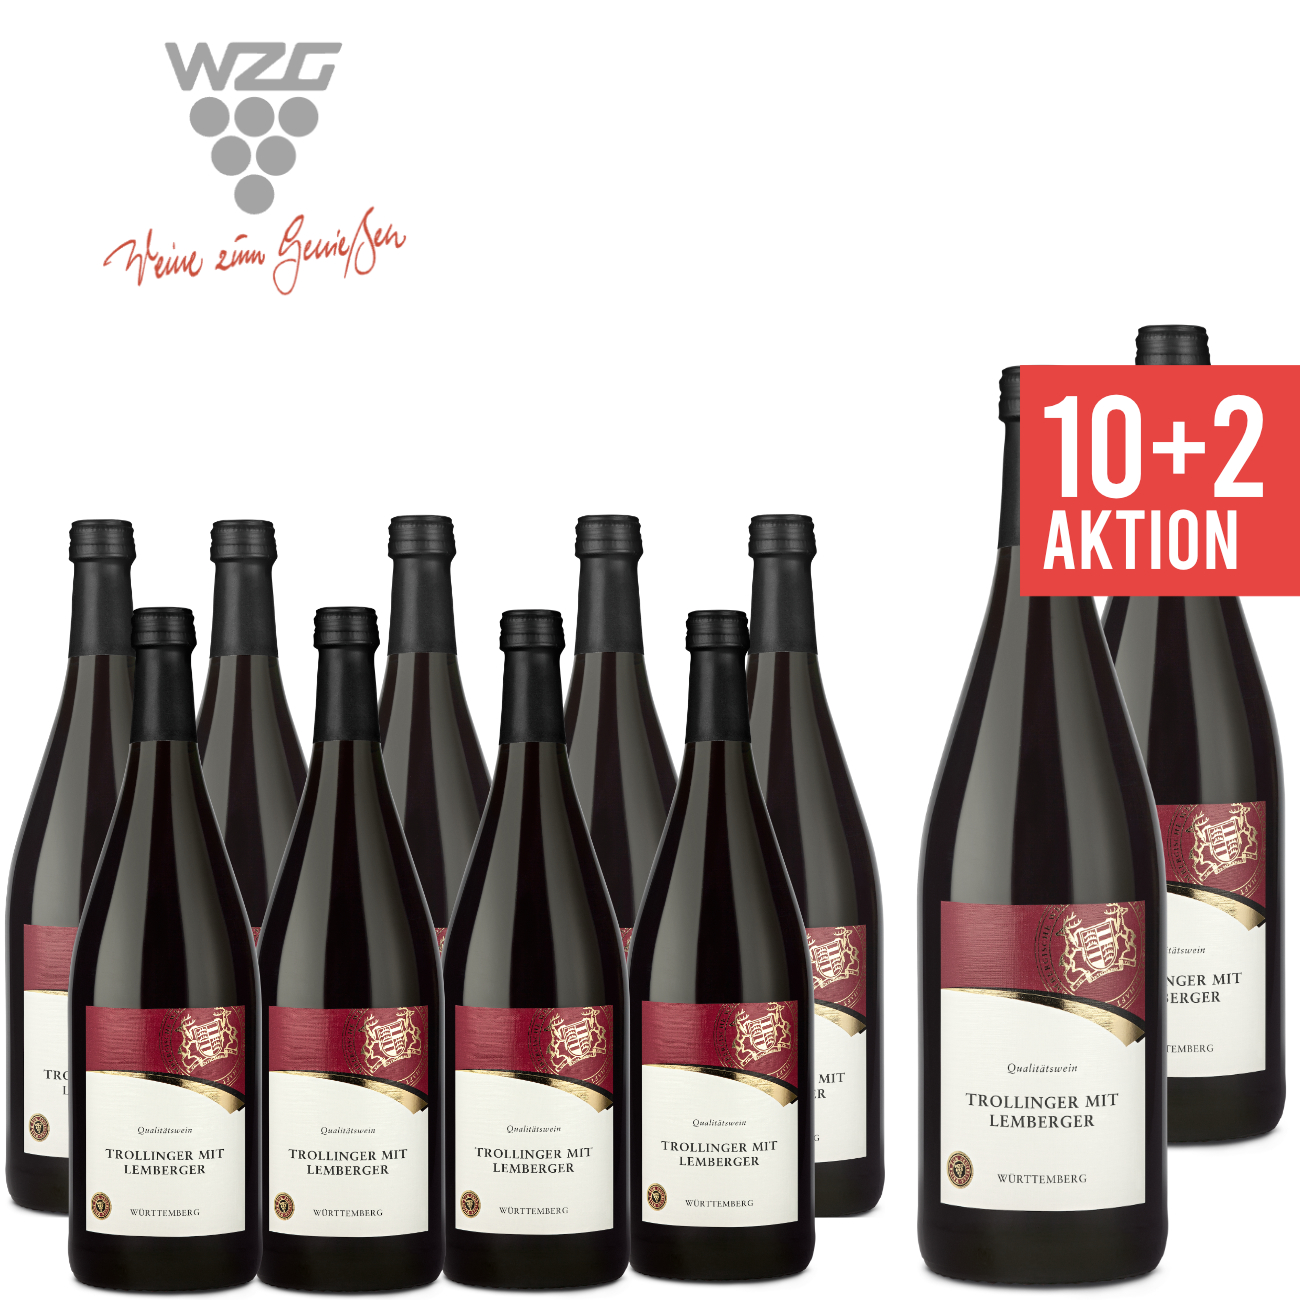 Find+Buy members Find+Buy: our of wein.plus wines wein.plus The |